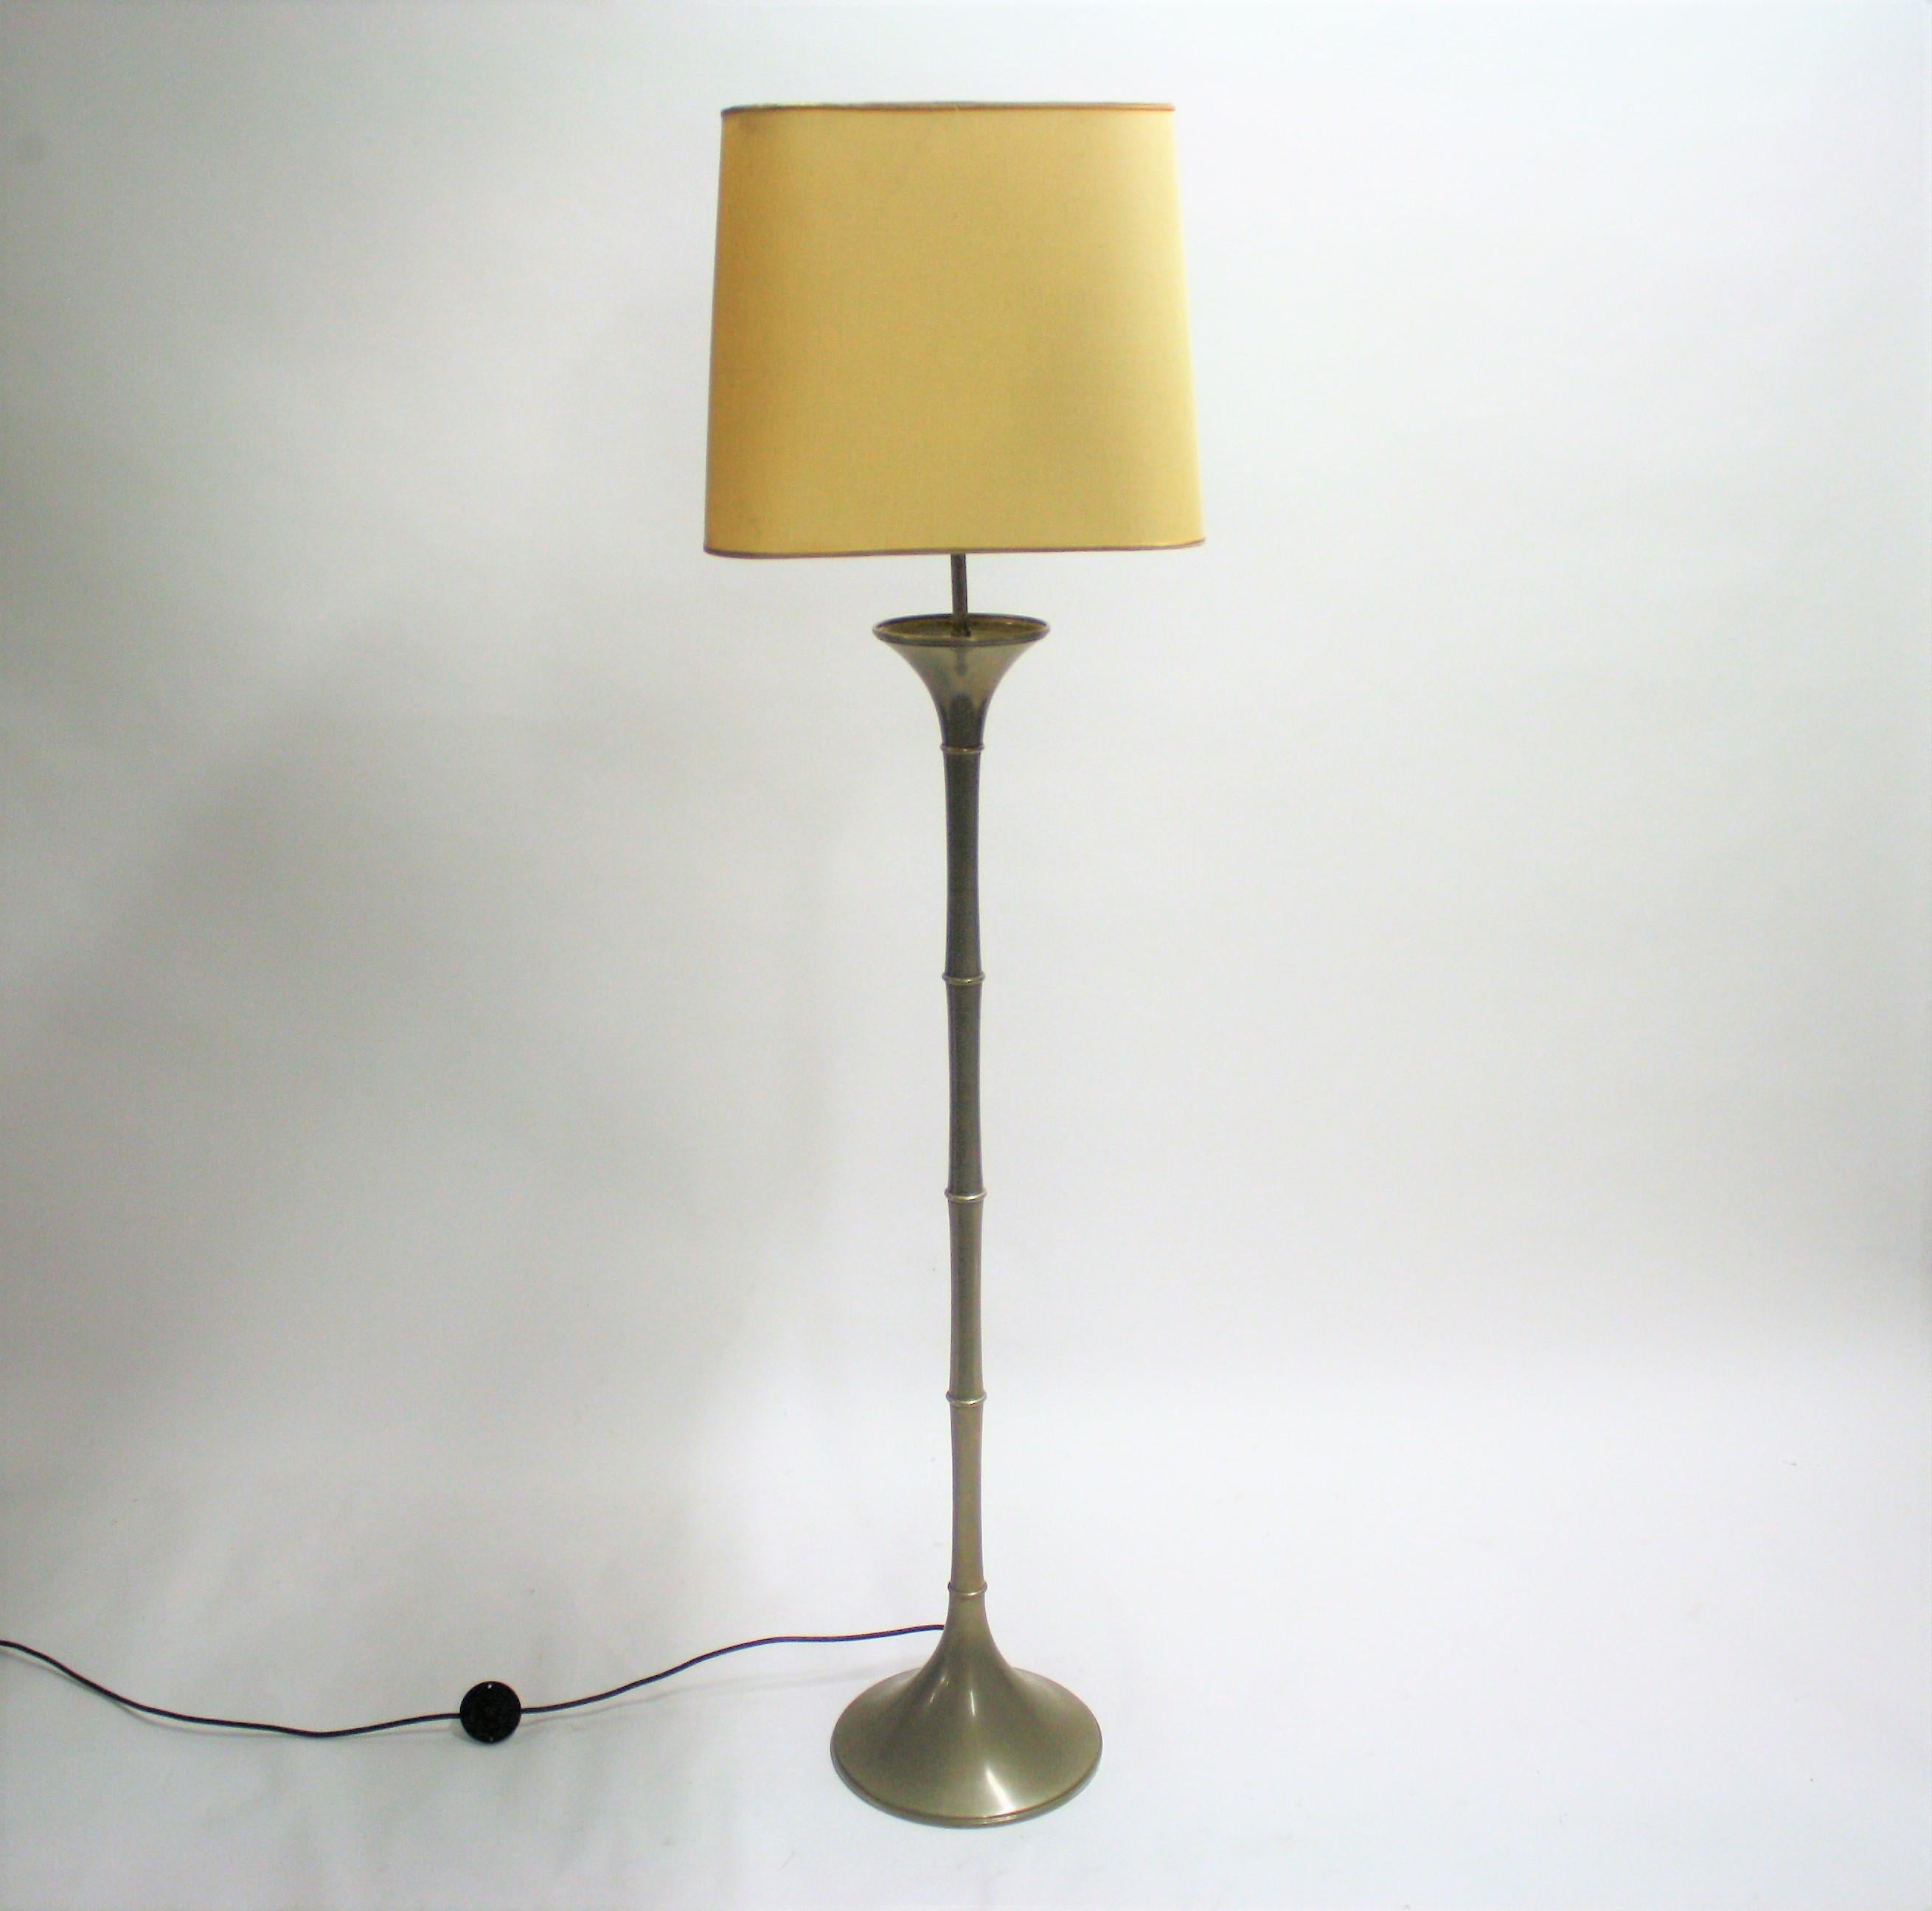 This ML 1 F 'Bamboo' floor lamp was designed by Ingo Maurer and manufactured in Germany in 1968

Good condition.

Comes with a vintage fabric shade.

Tested and ready to use with two regular E26/E27 light bulbs.

1968s,